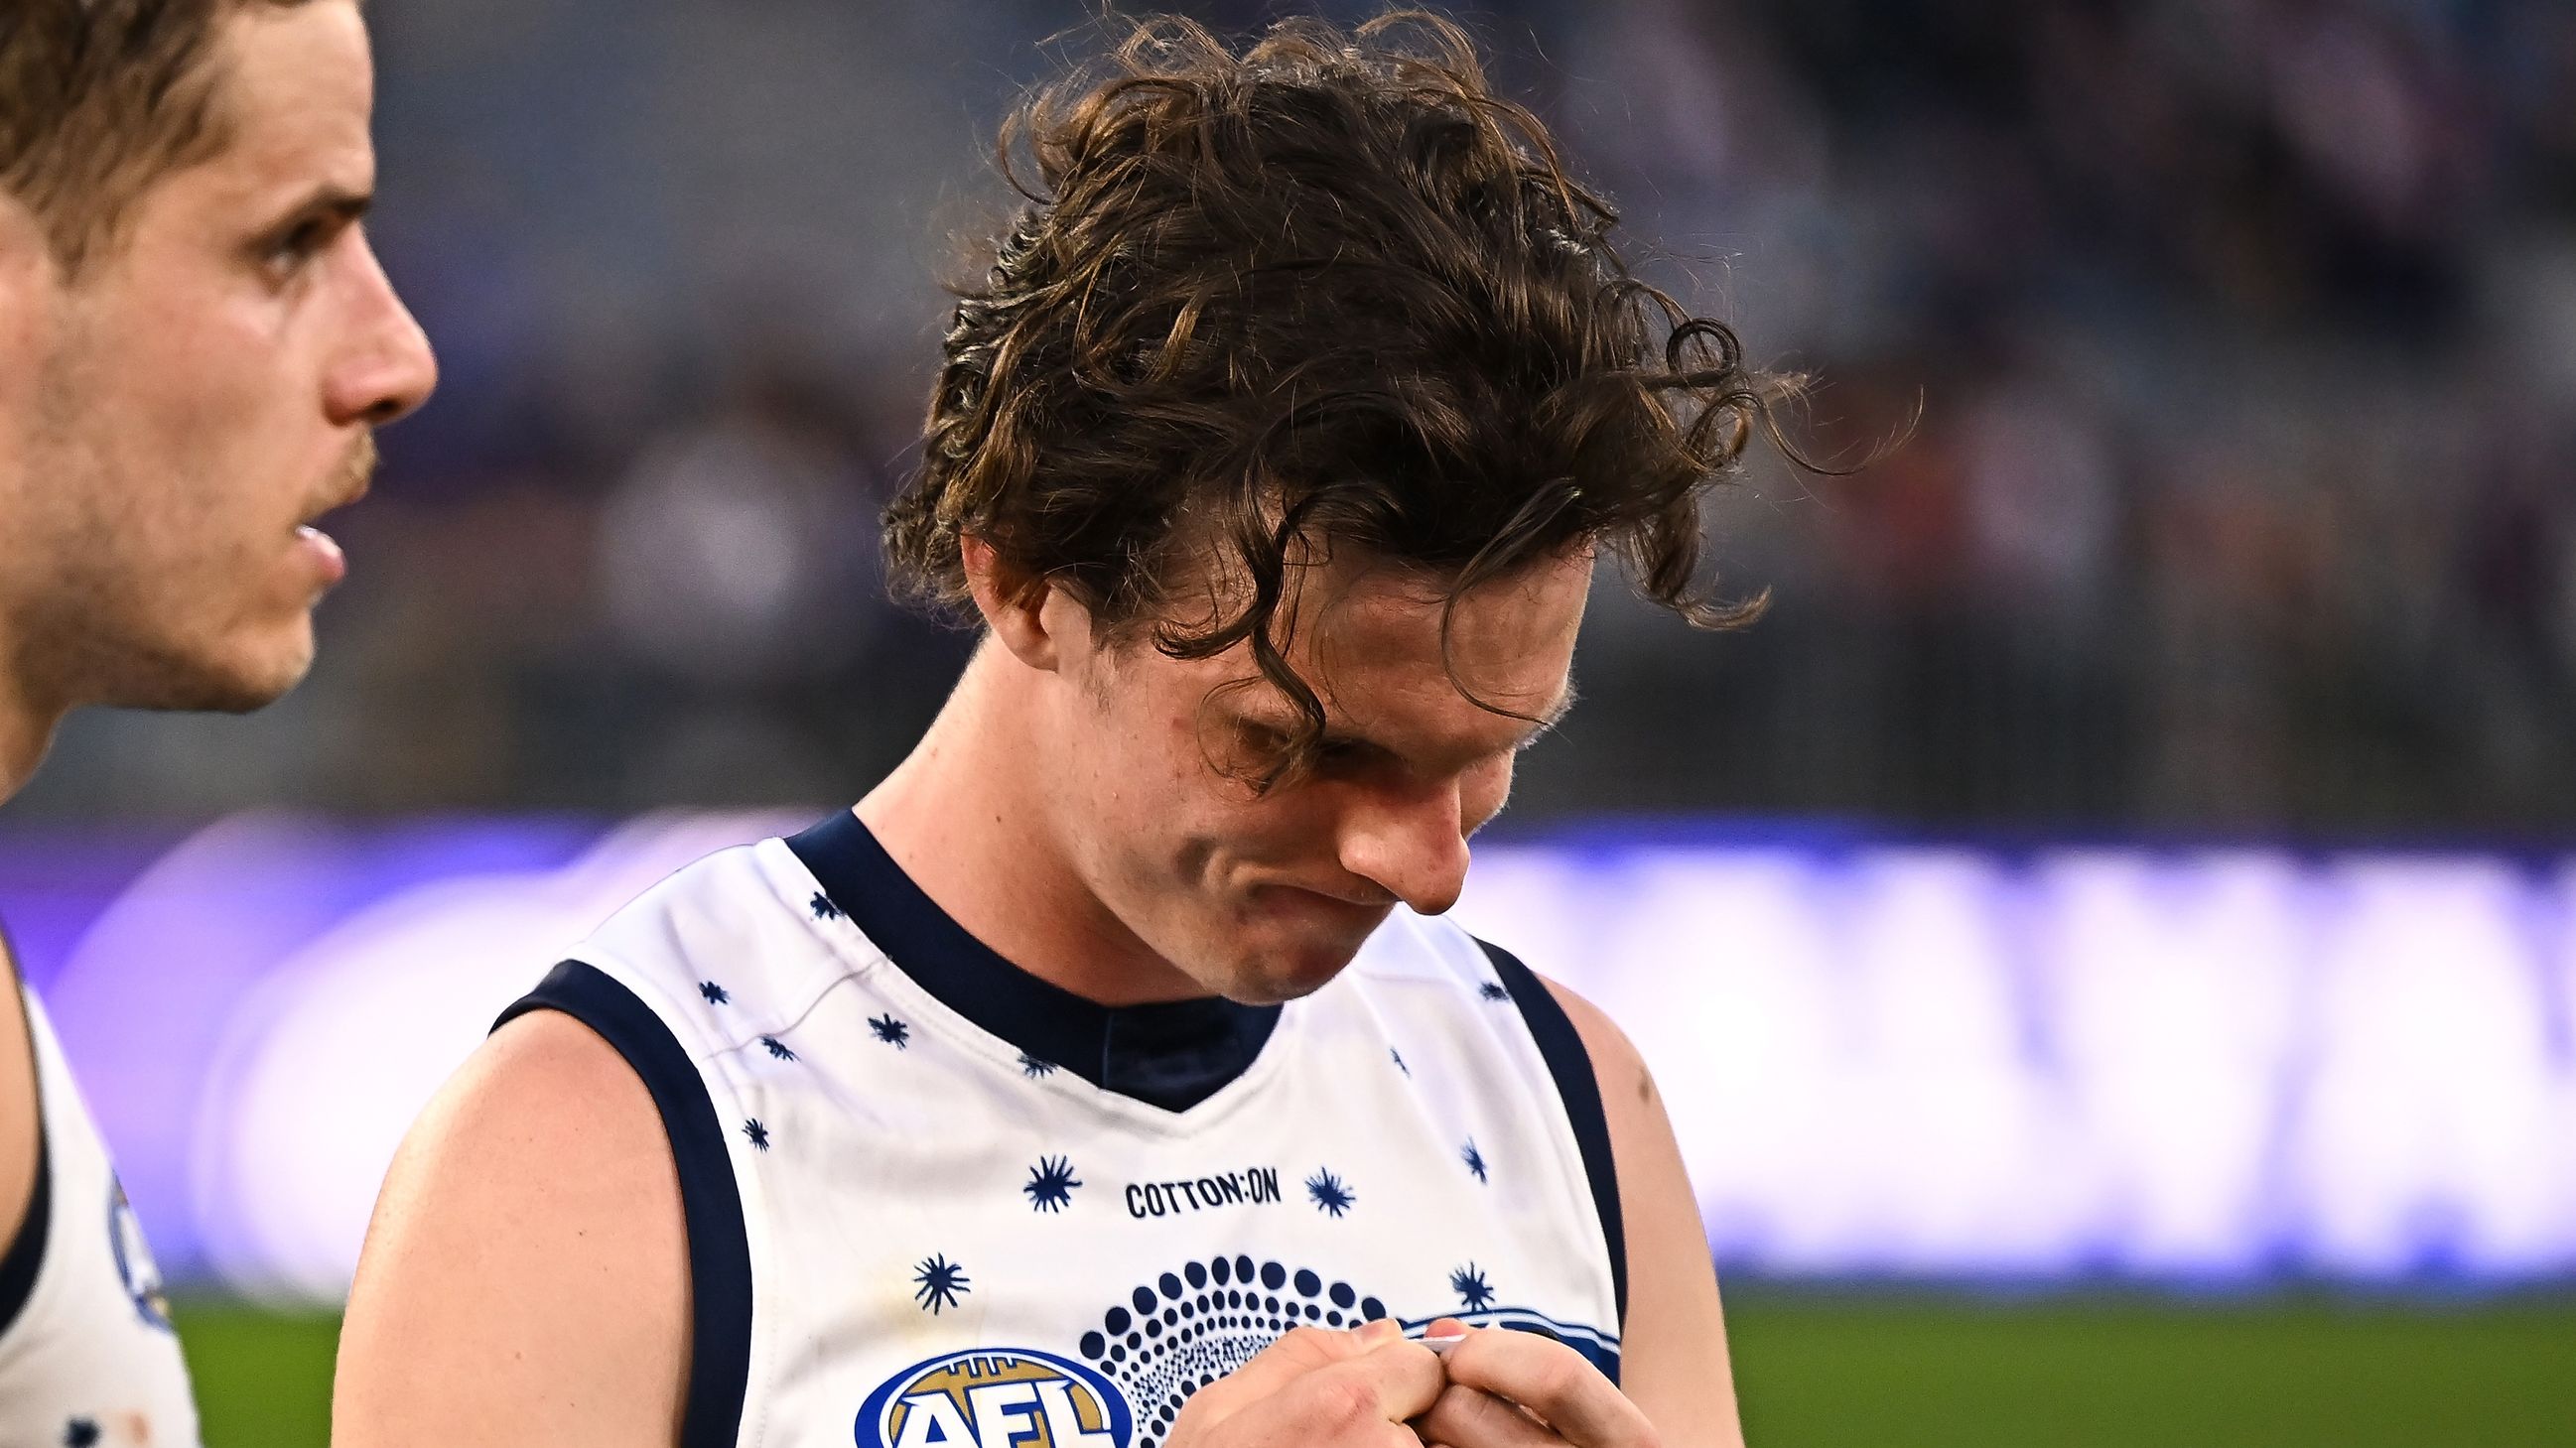 PERTH, AUSTRALIA - MAY 20: Max Holmes of the Cats looks dejected after a loss during the 2023 AFL Round 10 match between Walyalup/Fremantle Dockers and the Geelong Cats at Optus Stadium on May 20, 2023 in Perth, Australia. (Photo by Daniel Carson/AFL Photos)